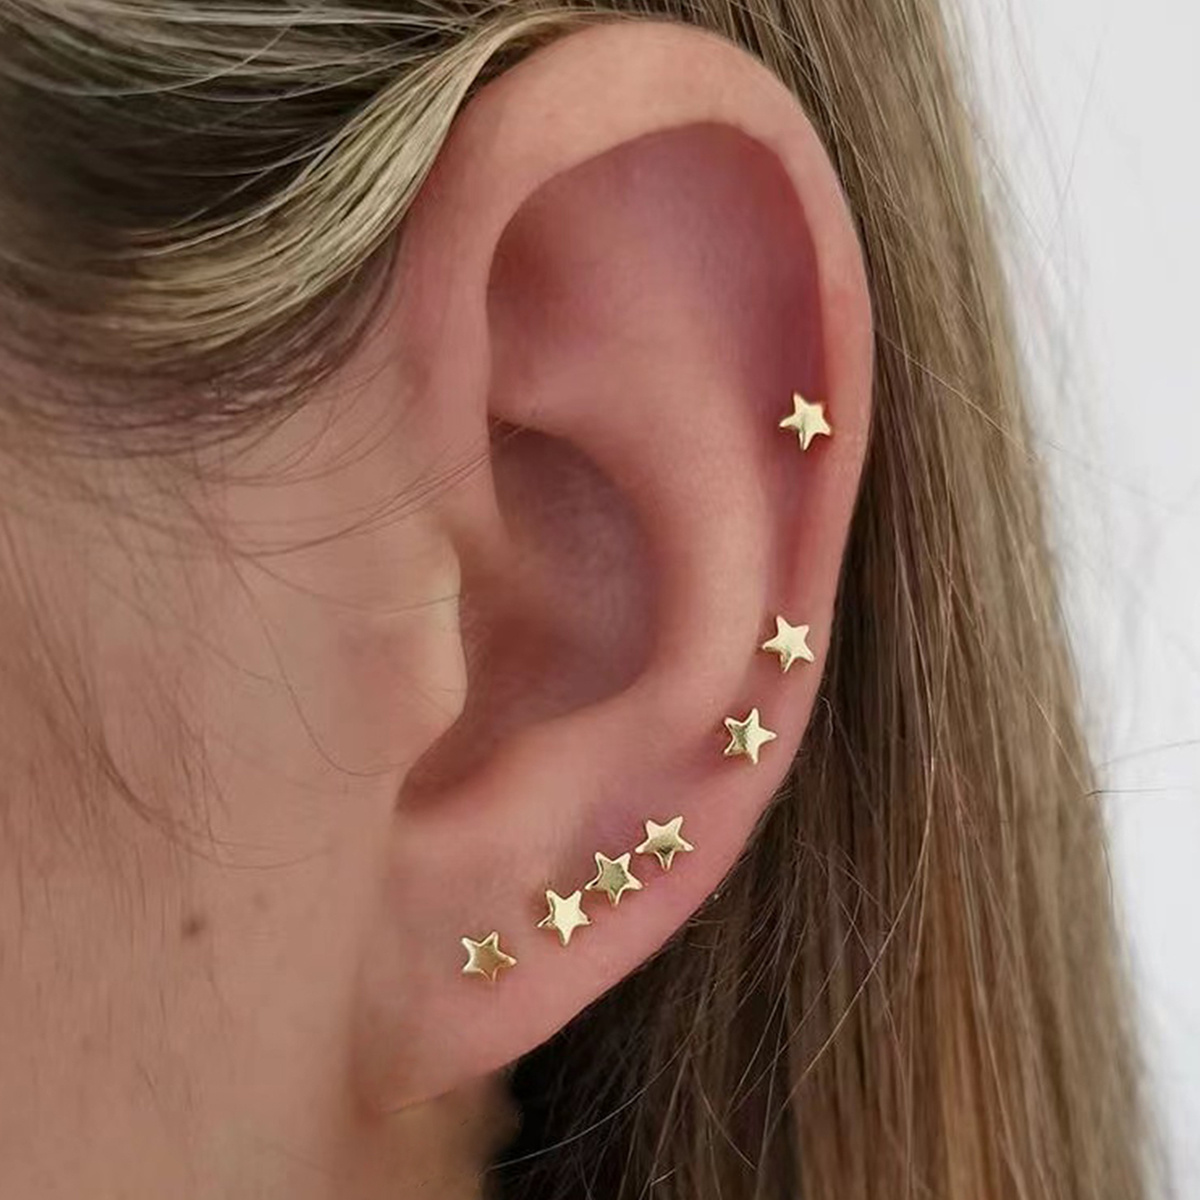 7pcs Star Stud Earrings Set 14K Gold Plated Jewelry, Jewels for Women Girls Small Earrings, Alloy, 0.49, Free, Christmas Styling & Gift, Returns